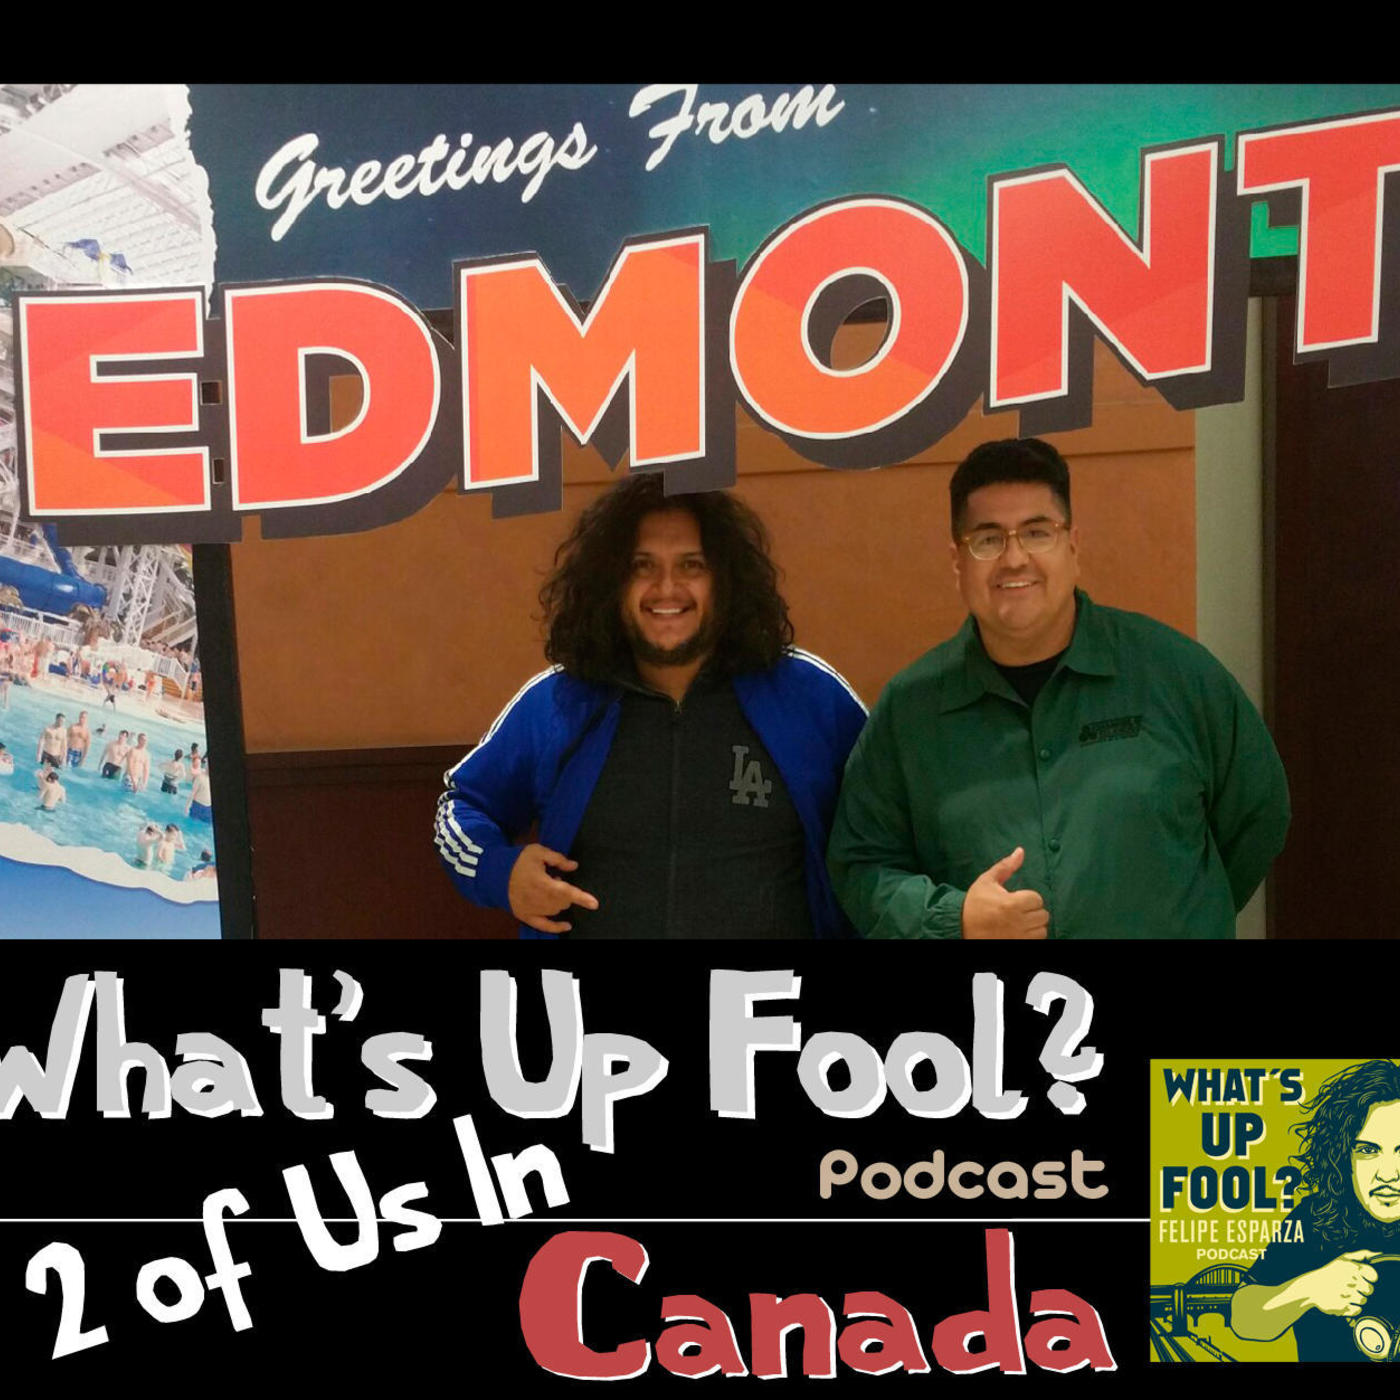 Ep 171 - Podcasting in Canada